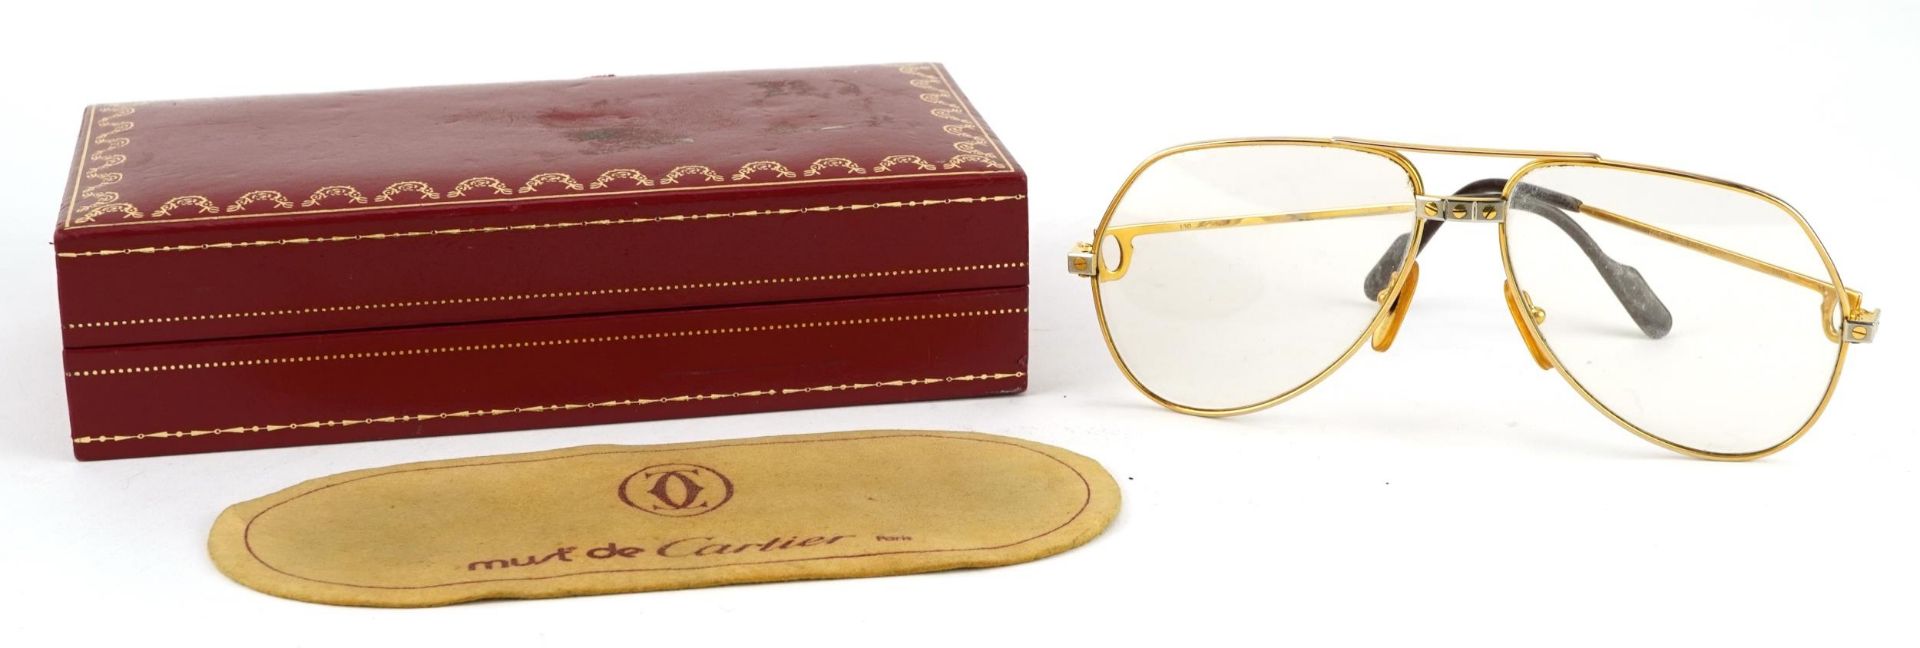 Pair of vintage Must de Cartier spectacles with fitted case numbered 5914, 14.5cm wide